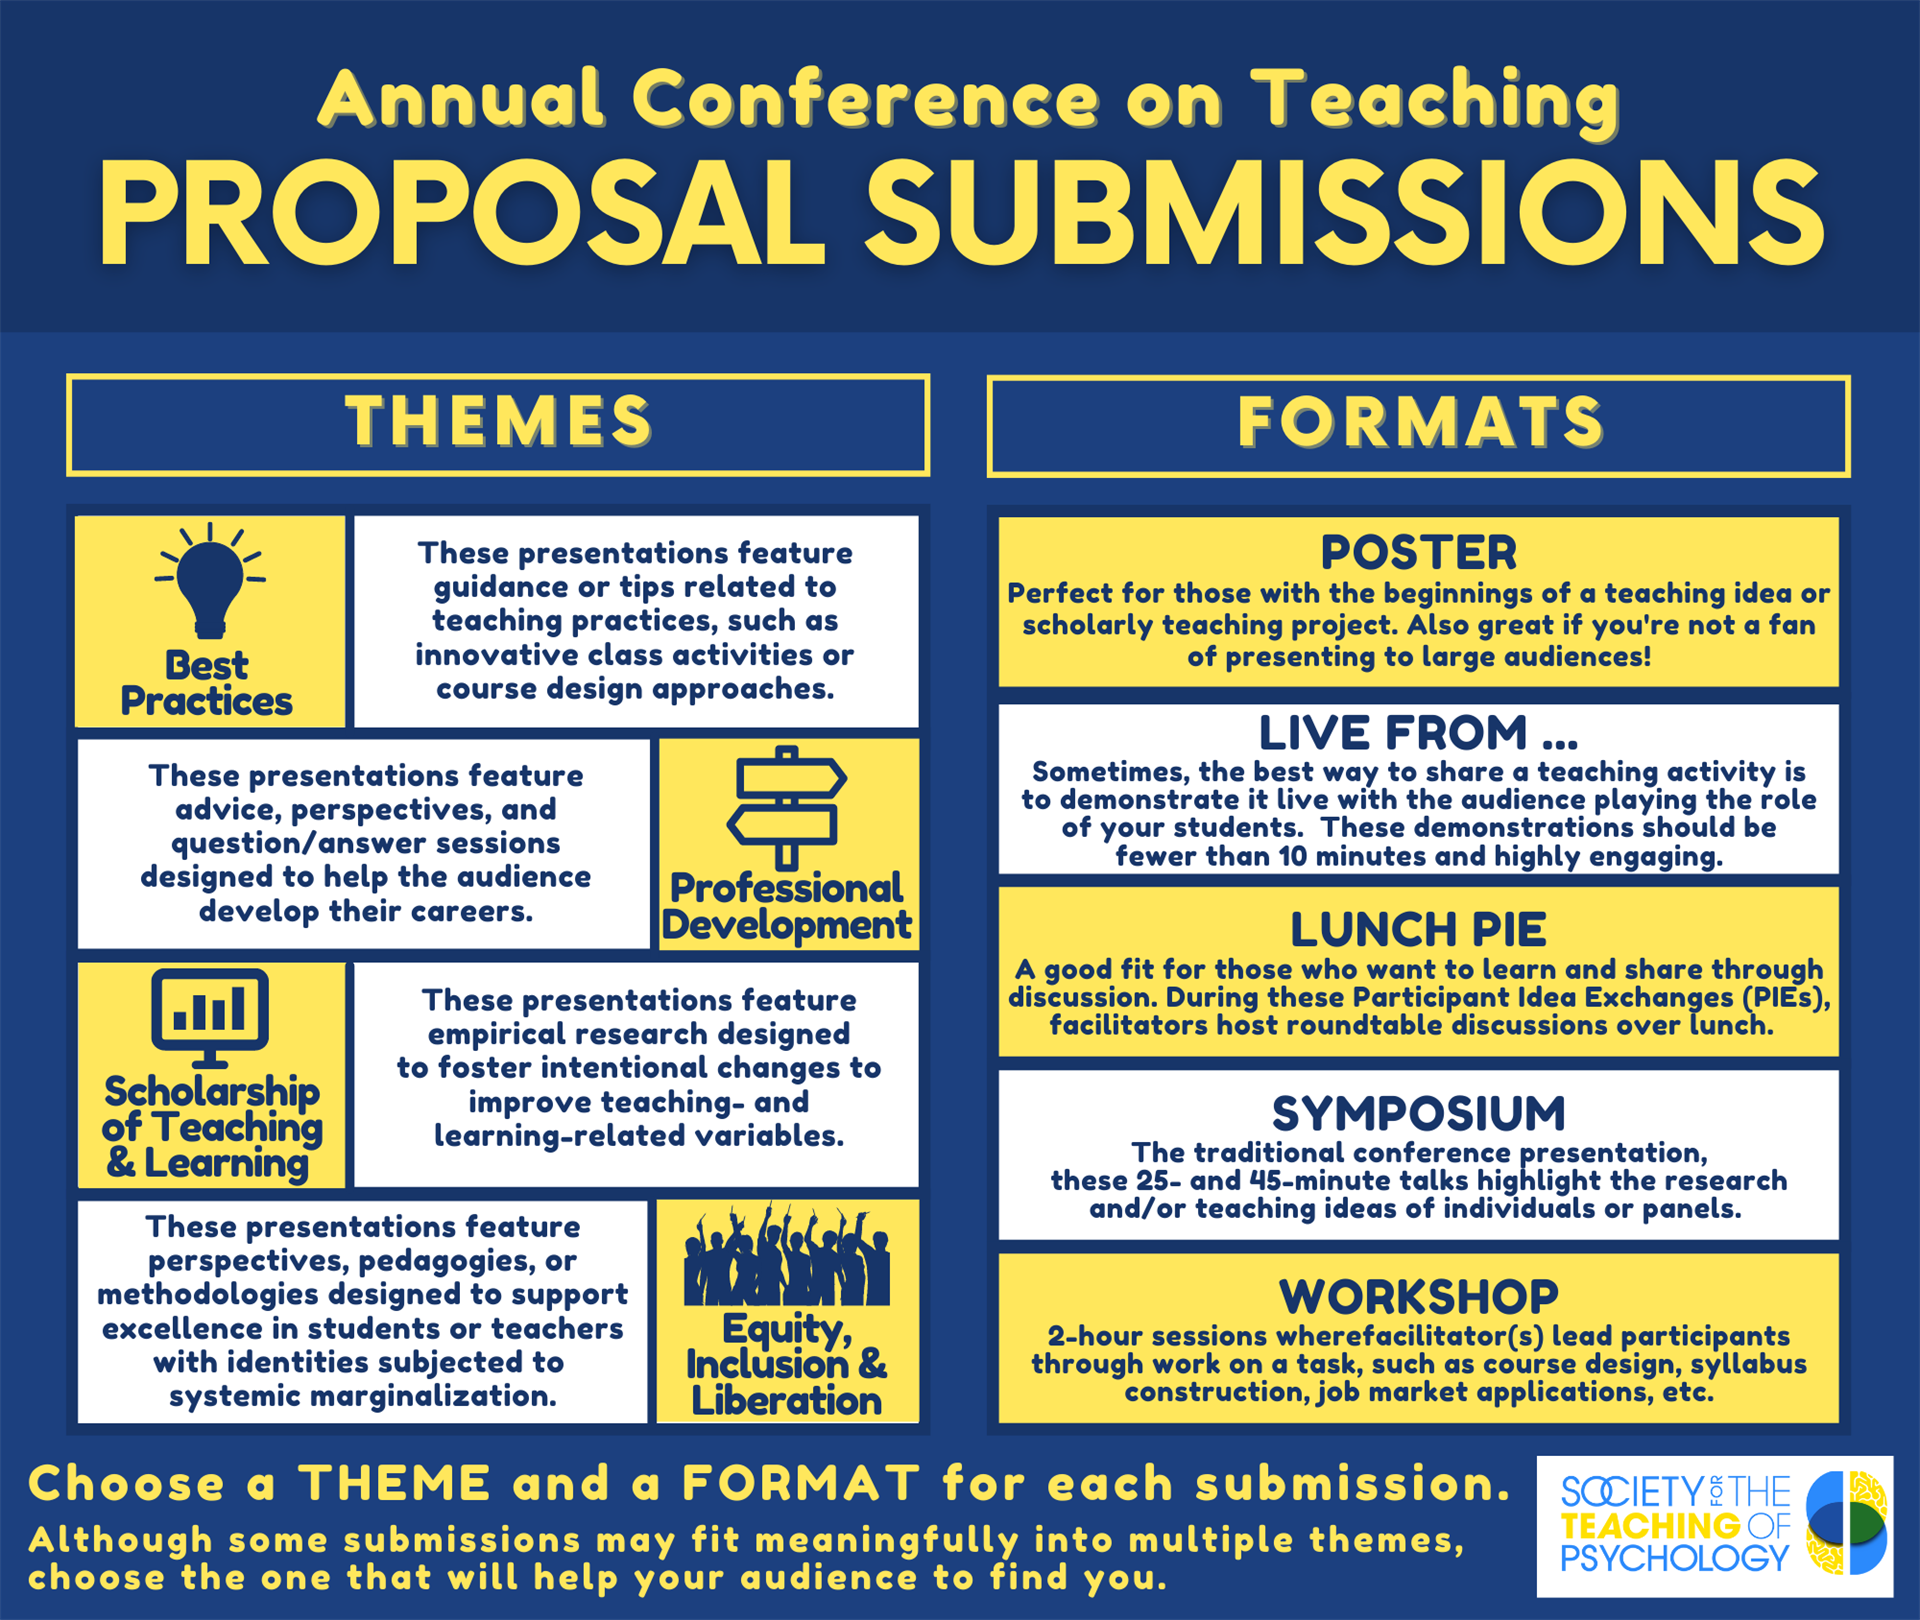 Proposal submission themes and formats. Please see text-accessible hyperlink below the graphic.